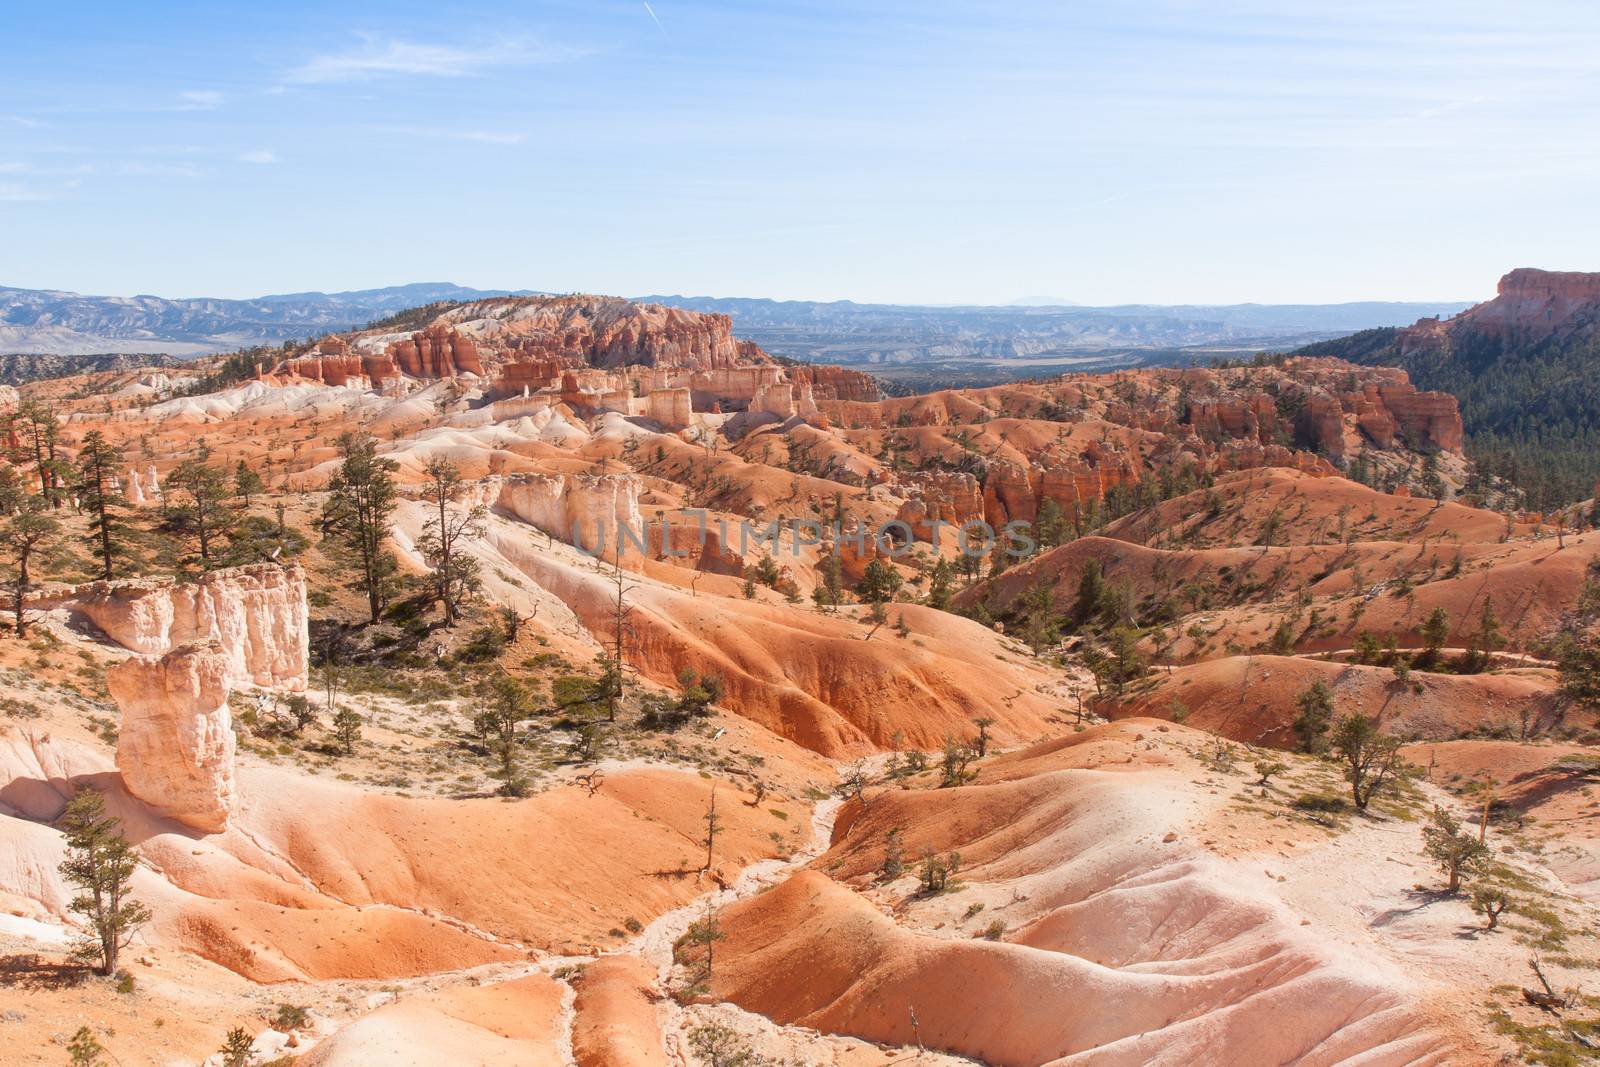 Sensory overload is a real possibility at the Utah national parks. After days of incredible sites the incredible starts to become the norm. What a high standard Utah has set.